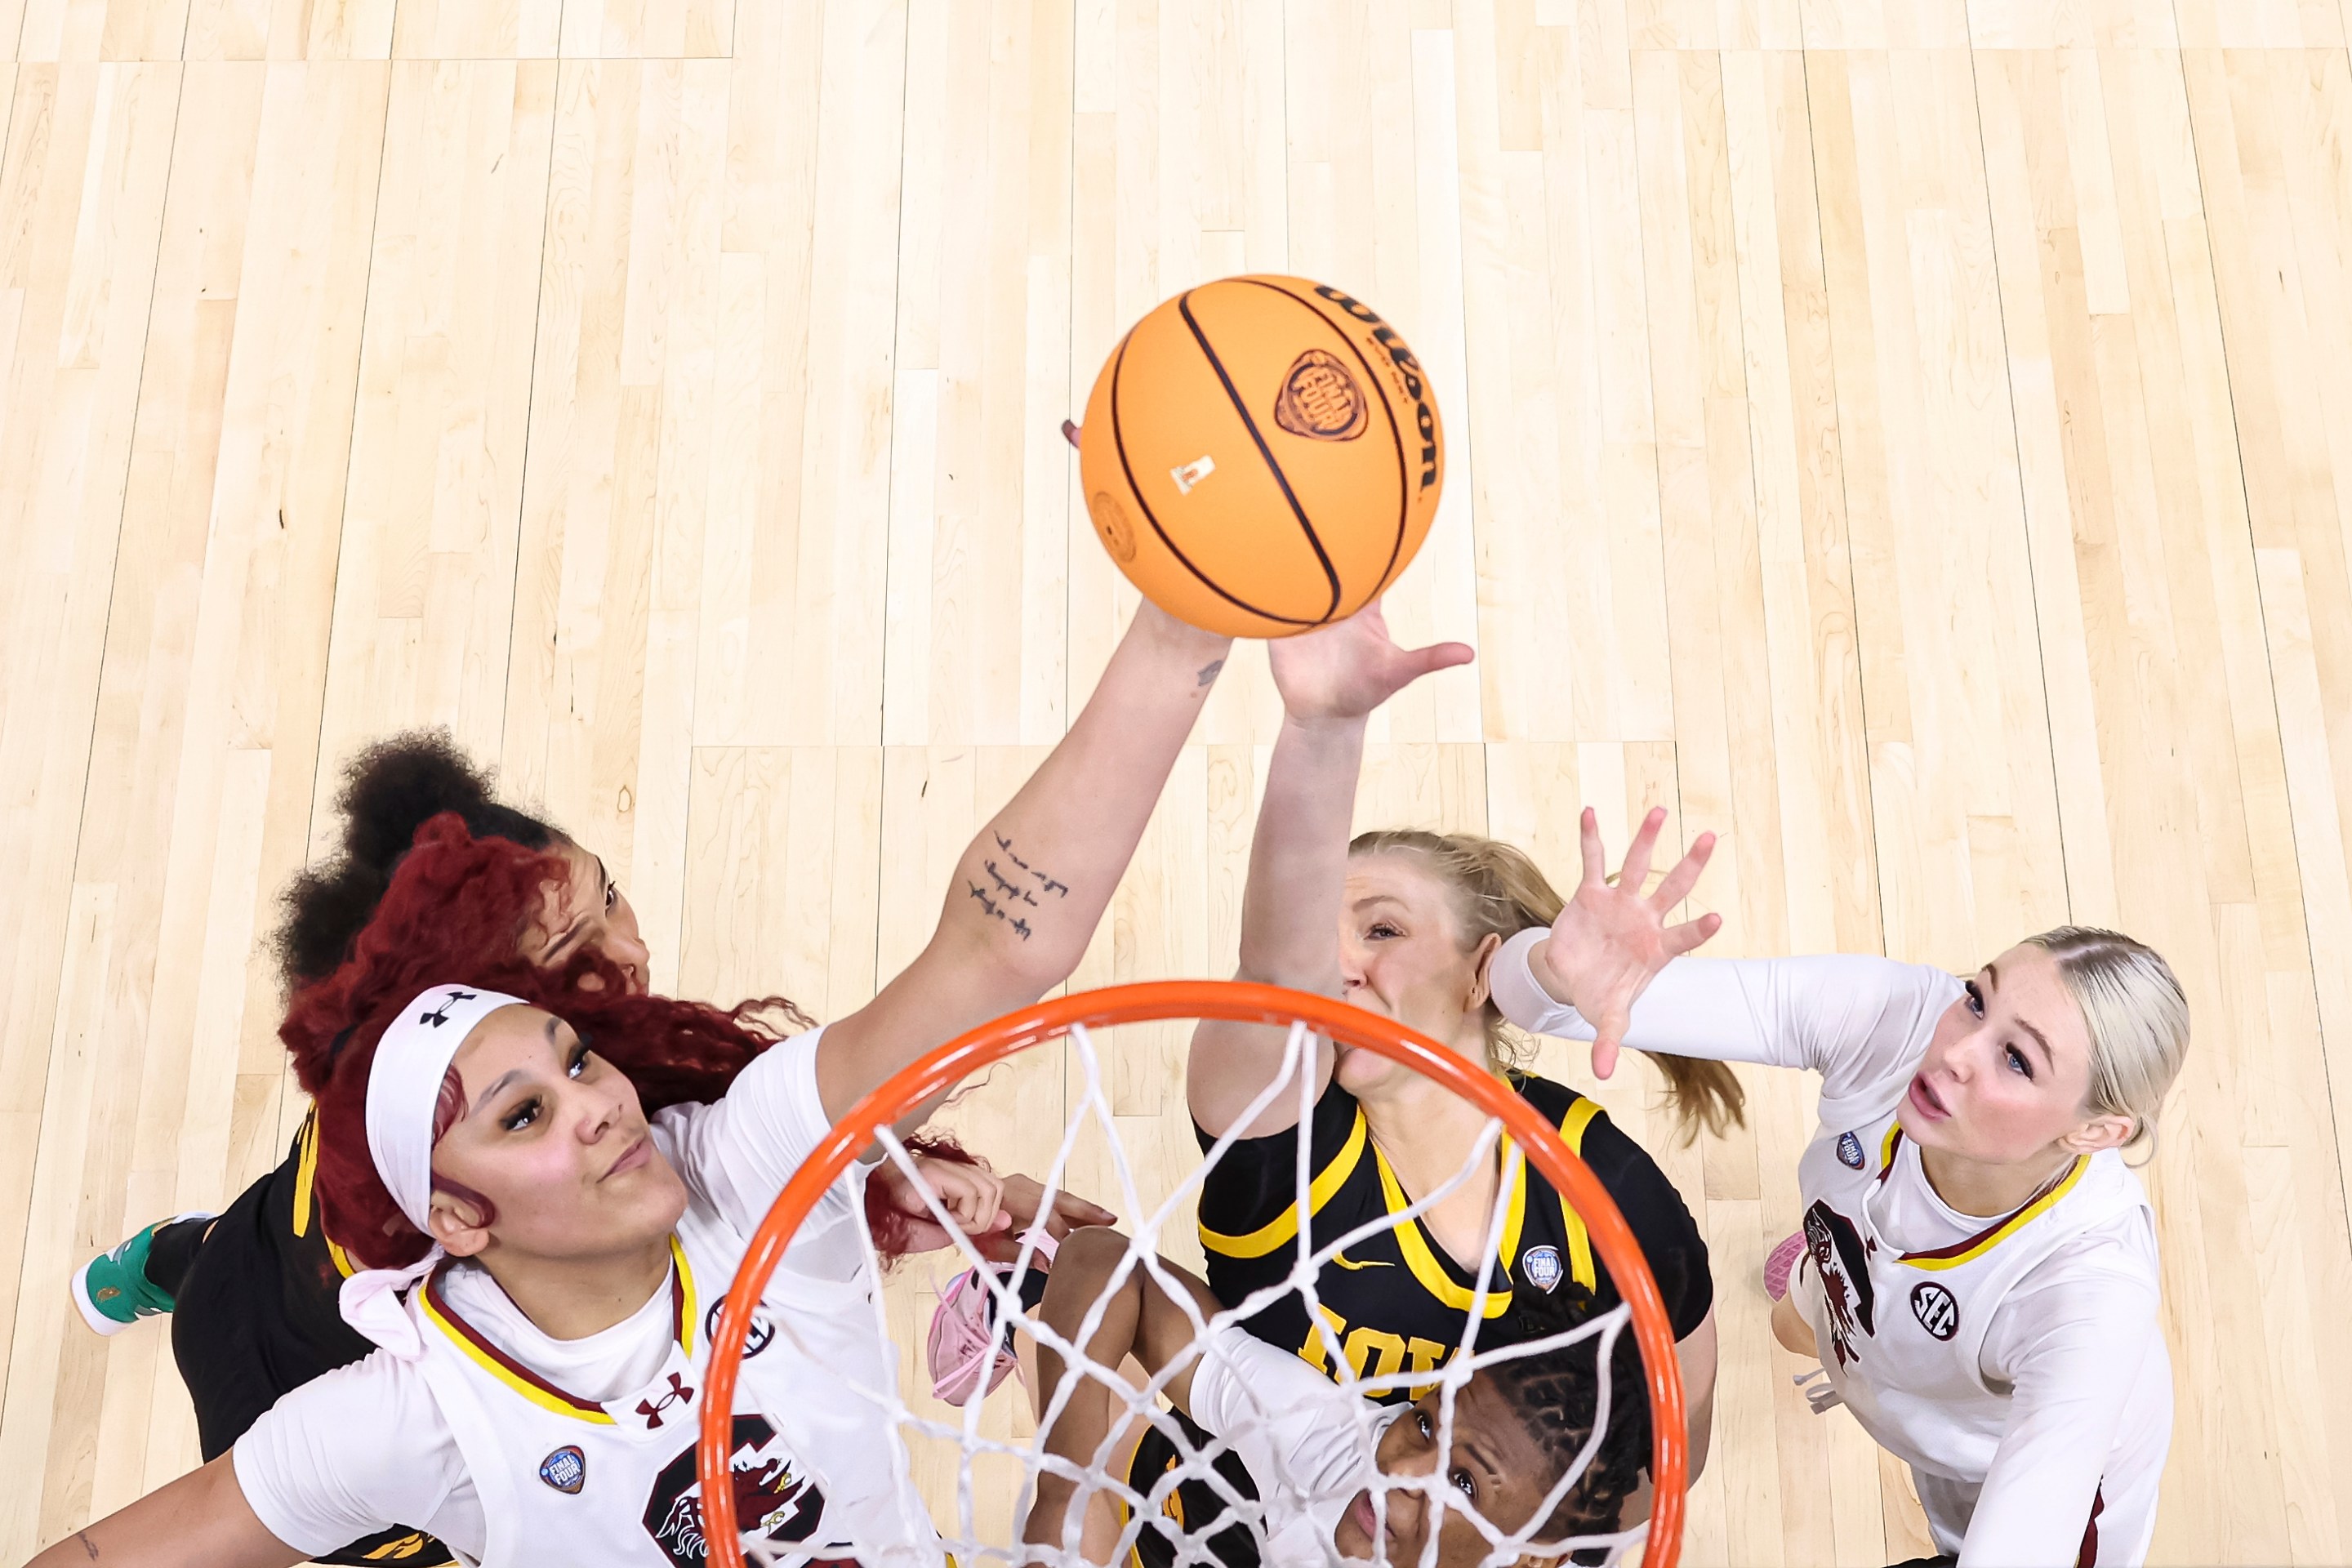 Kamilla Cardoso #10 of the South Carolina Gamecocks and Sydney Affolter #3 of the Iowa Hawkeyes jump for a rebound during the NCAA Women's Basketball Tournament Final Four National Championship game at Rocket Mortgage Fieldhouse on April 7, 2024 in Cleveland, Ohio.